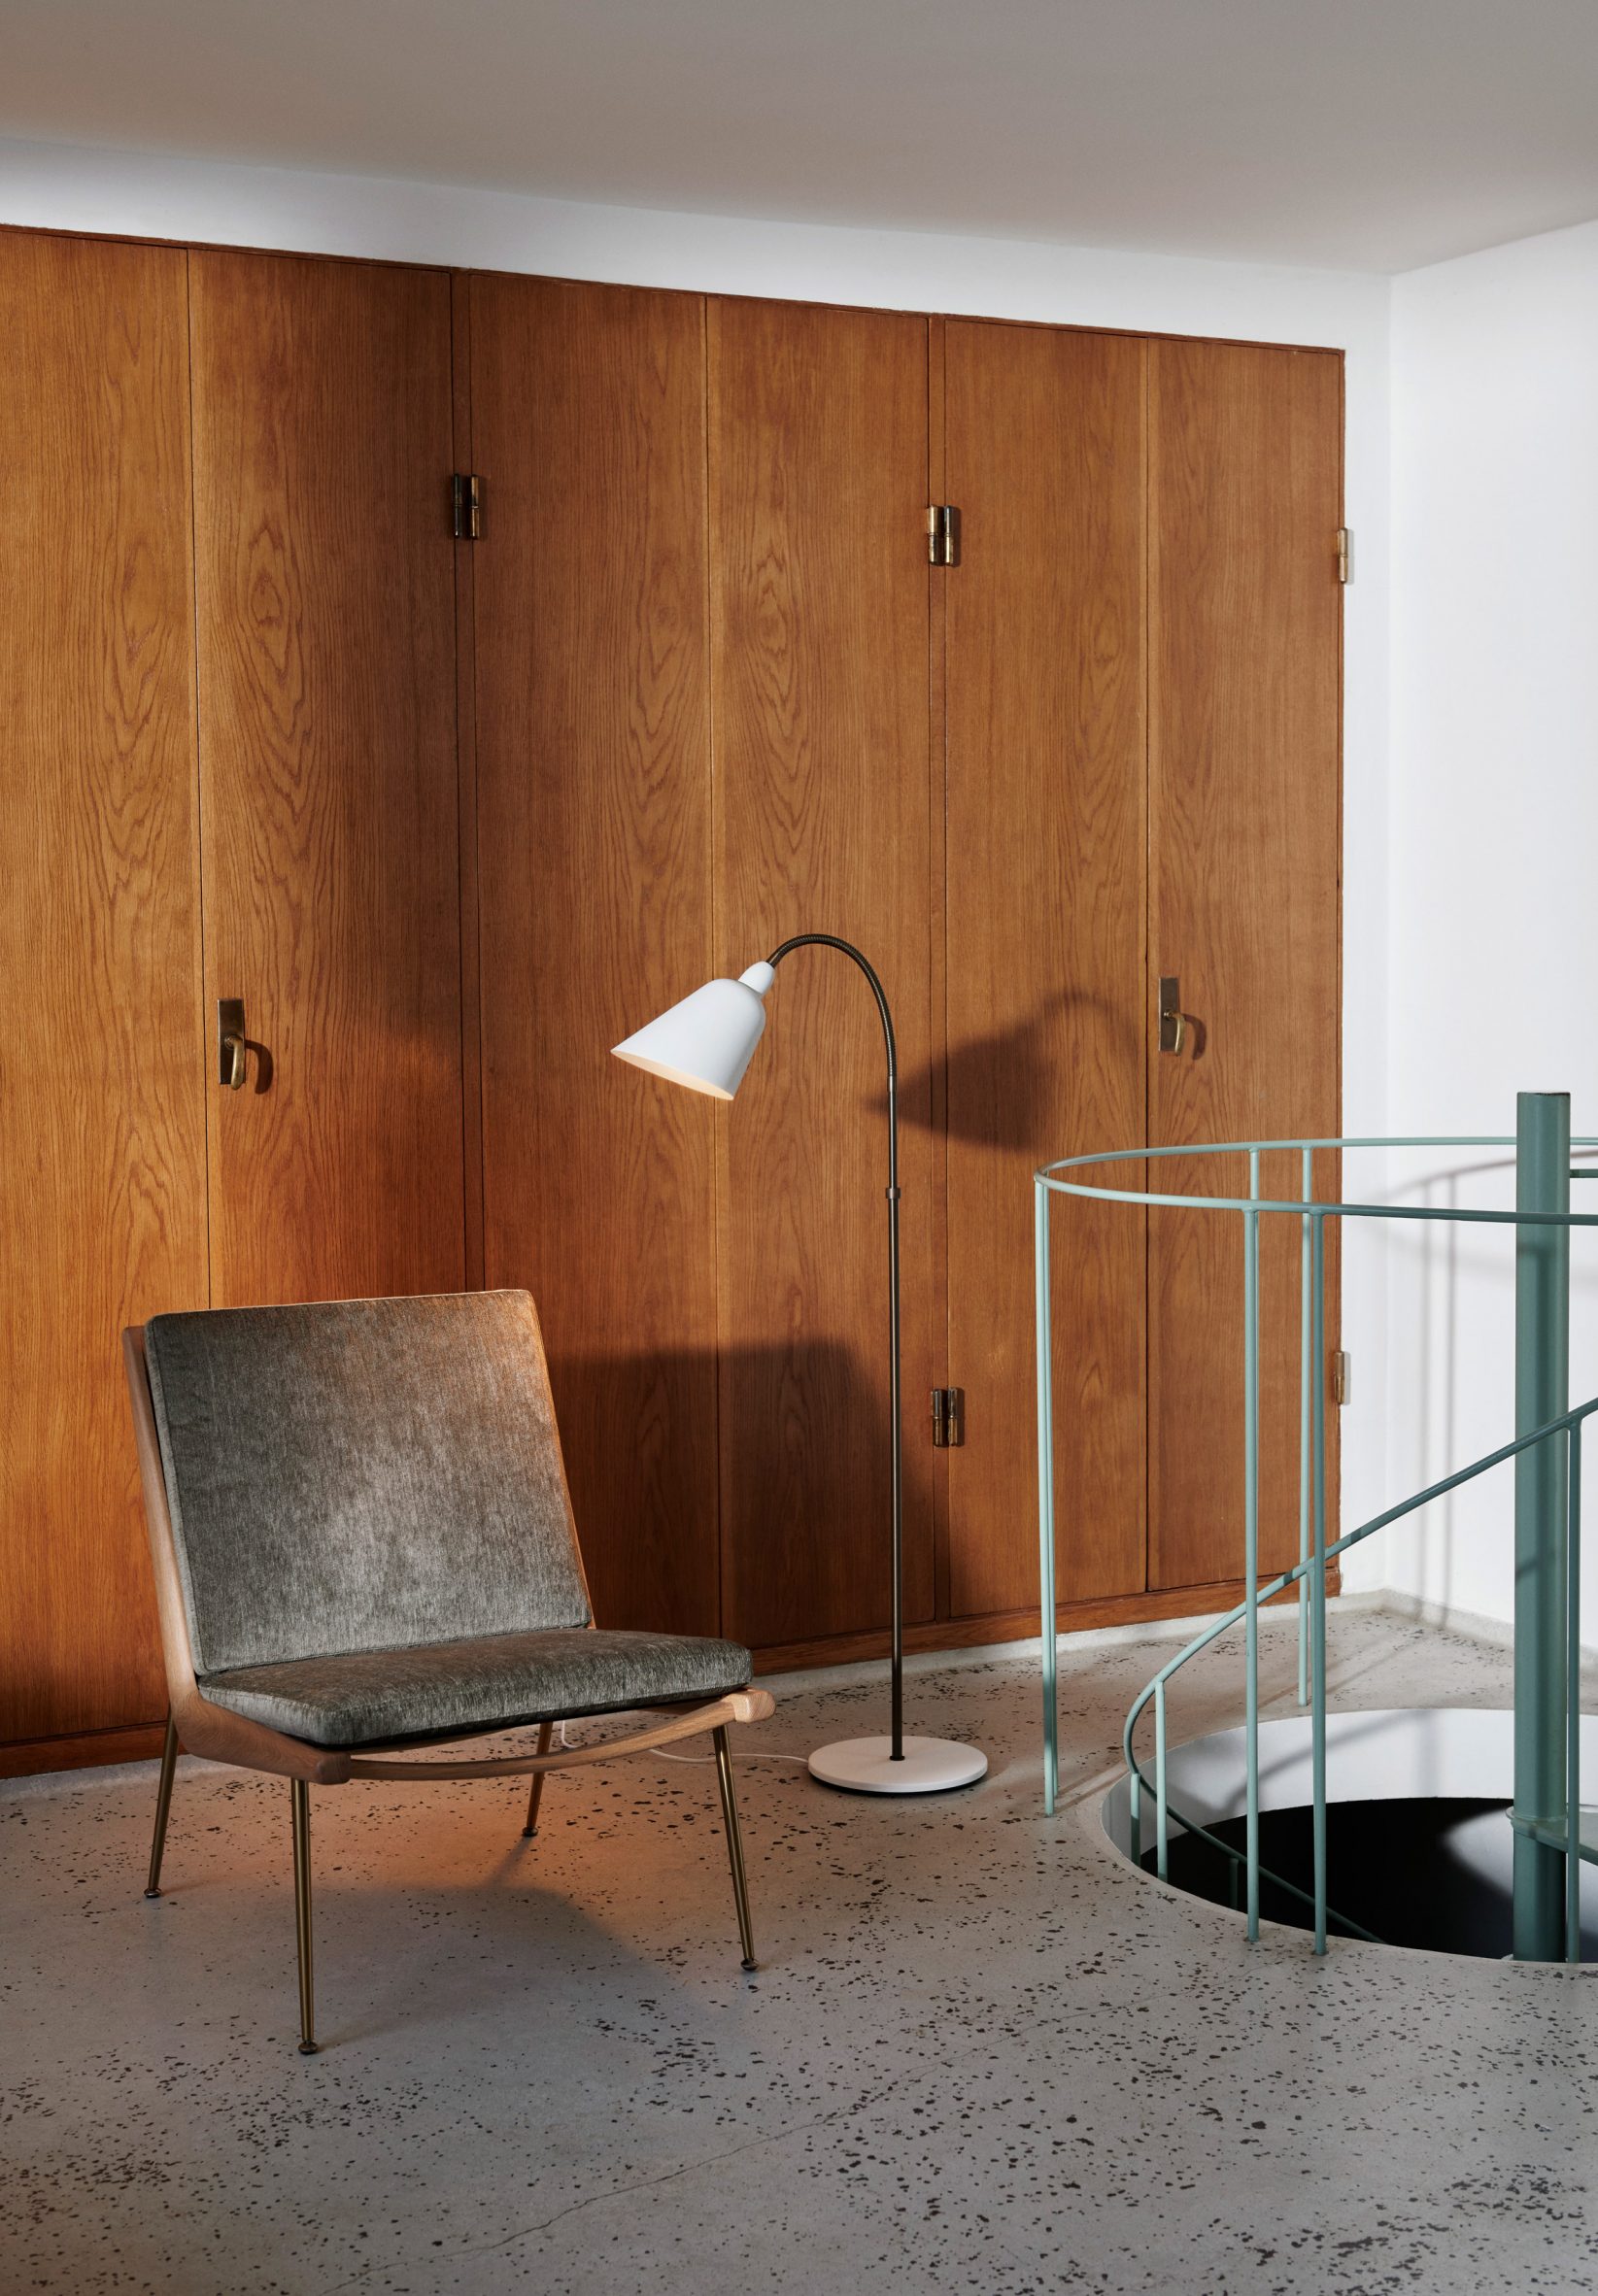 White Bellevue floor lamp by Arne Jacobsen for &Tradition next to a lounge chair